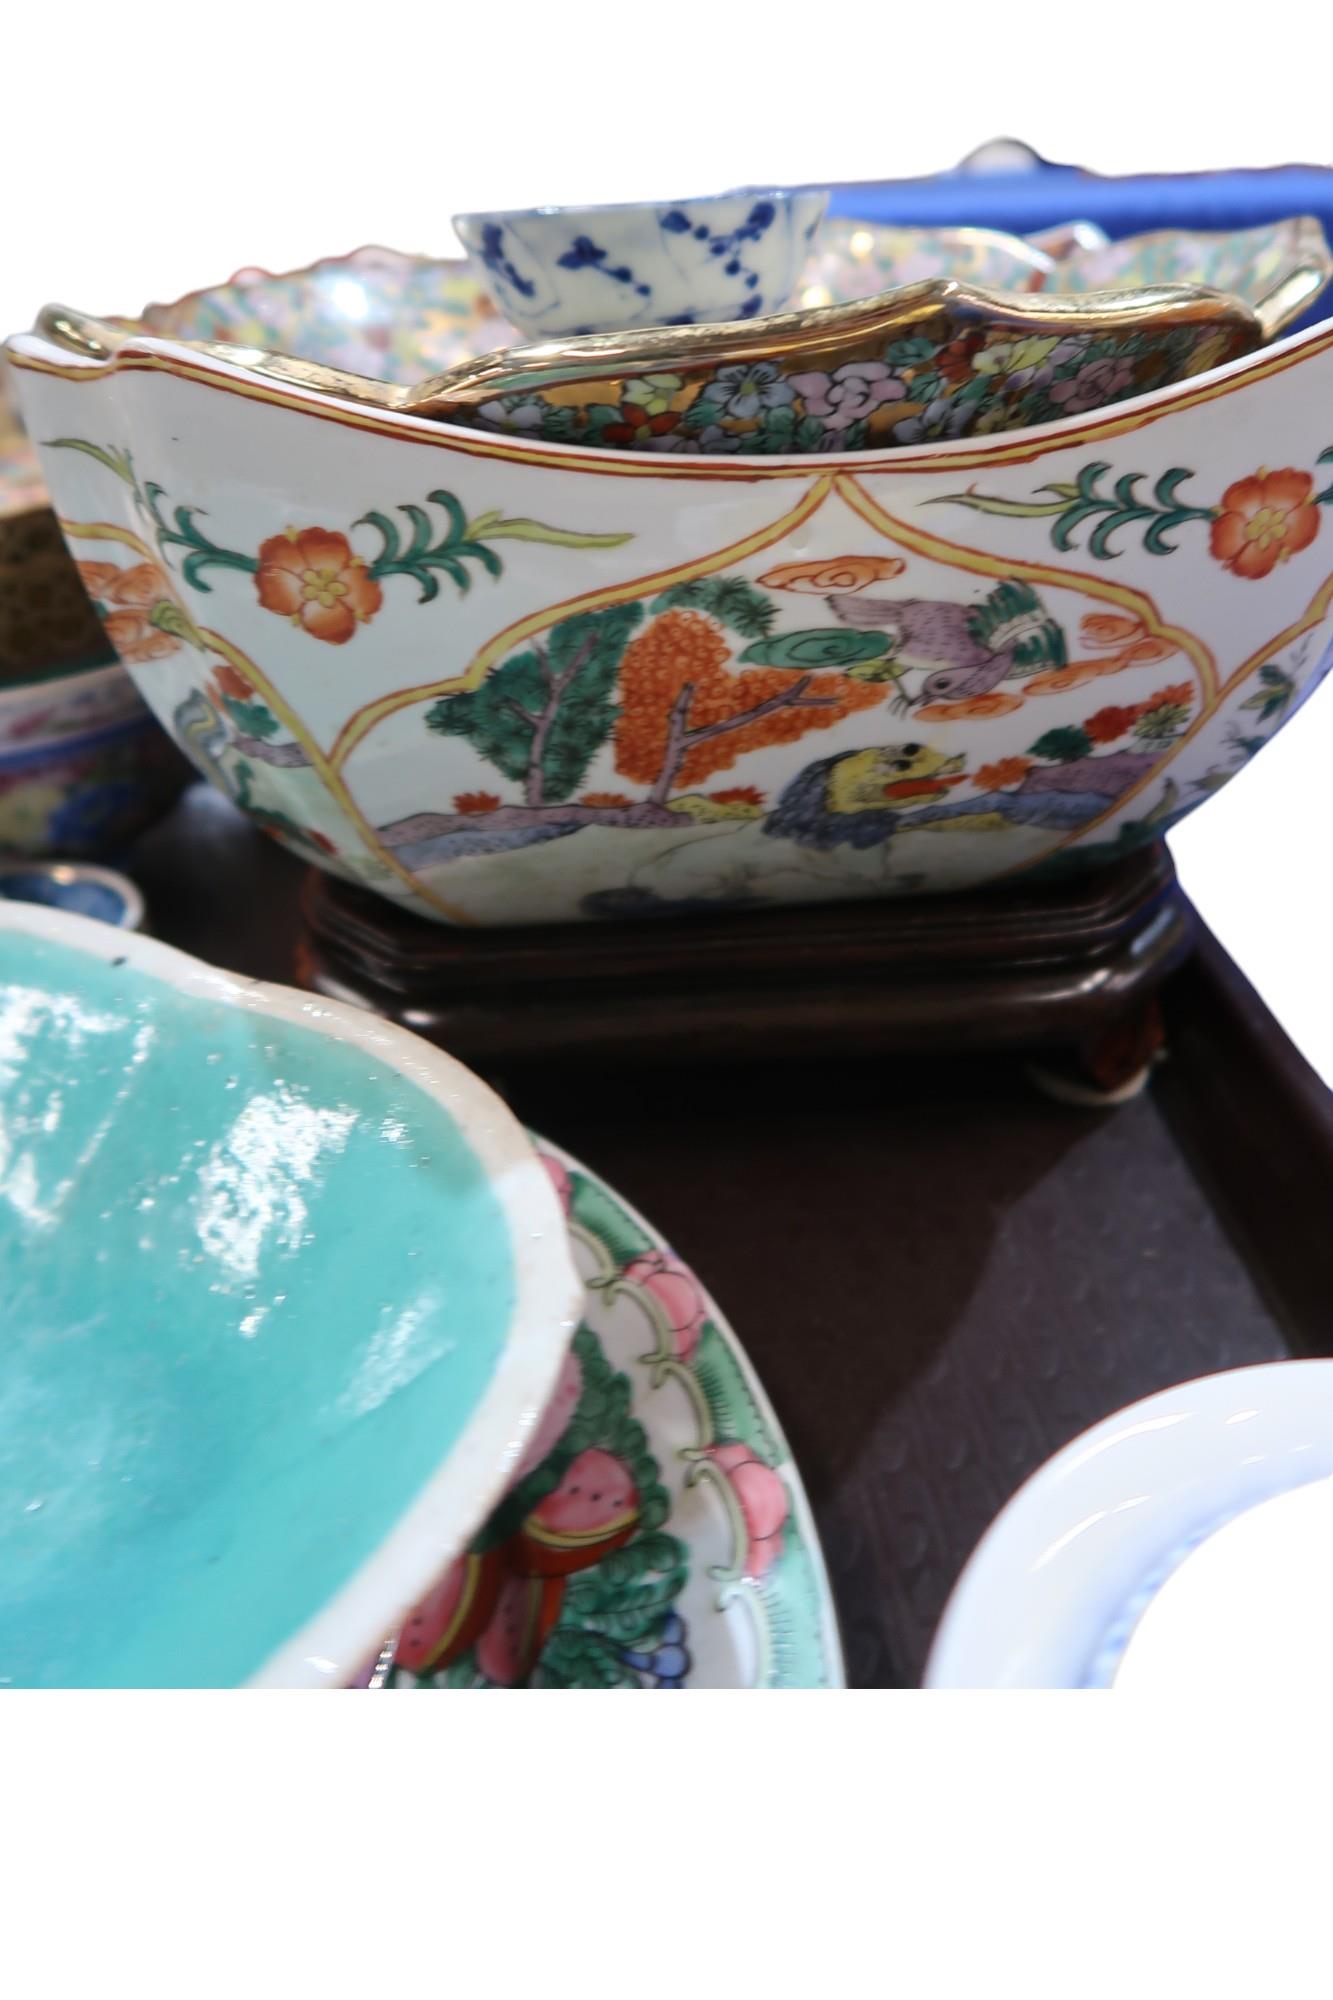 A collection of mainly Chinese ceramics including a Famille rose plate, a dish, a red cameo glass - Image 2 of 3